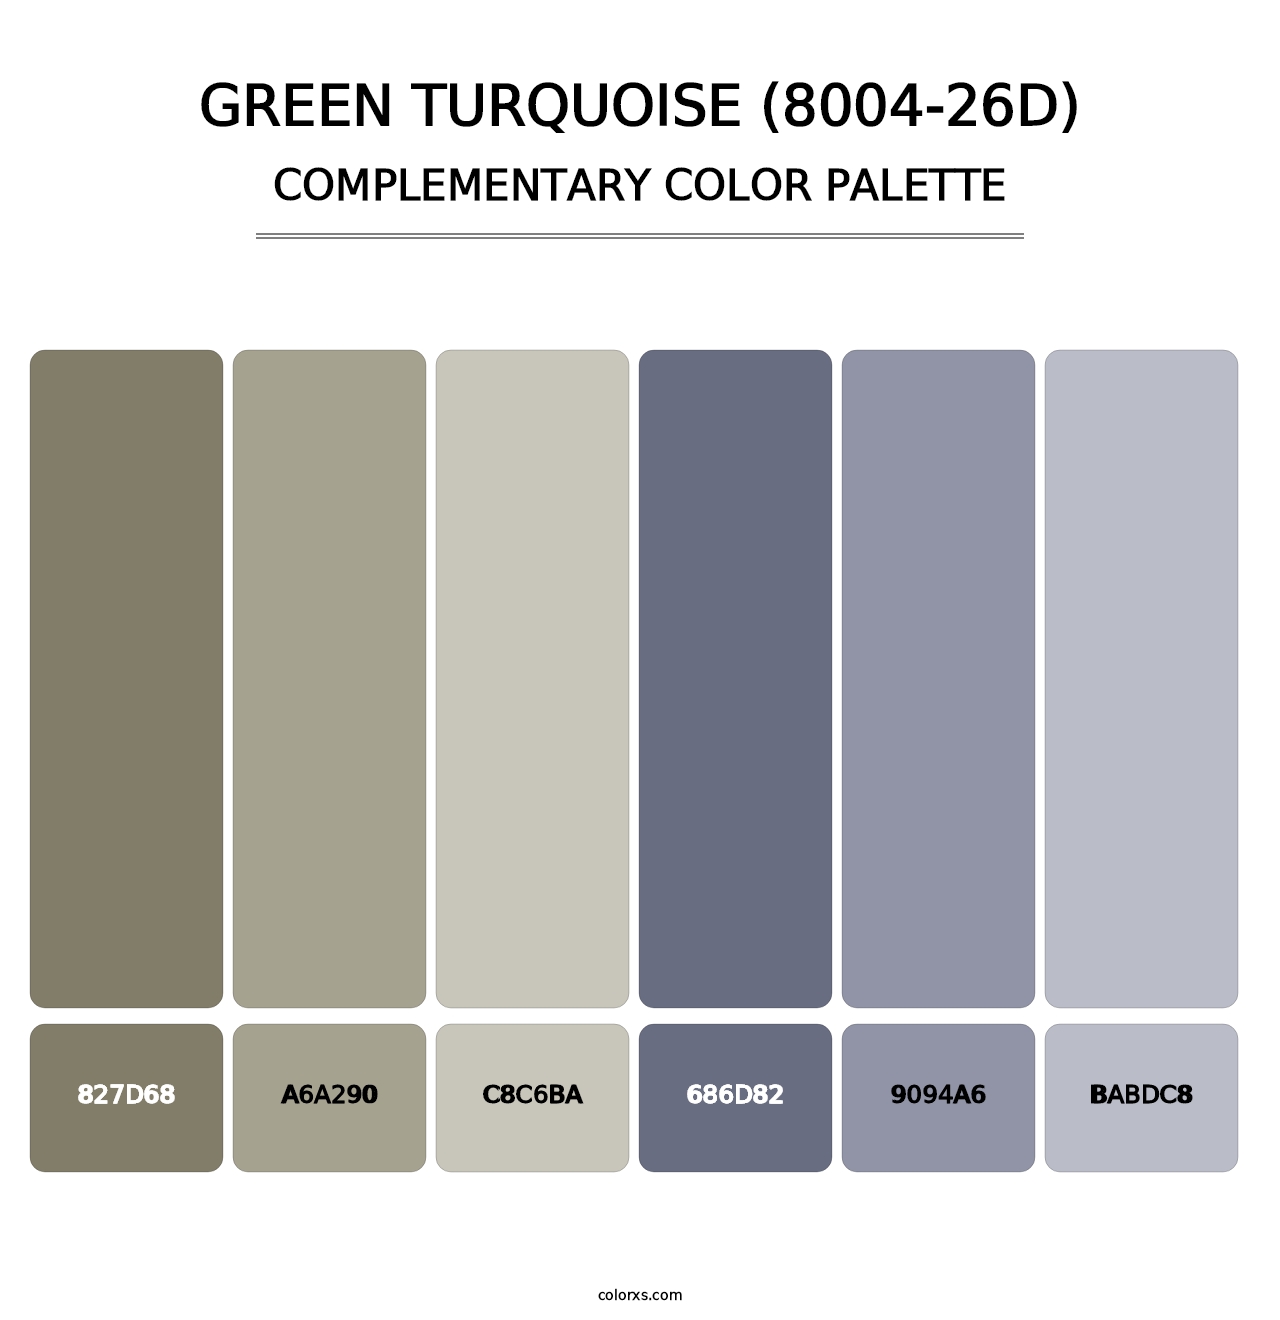 Green Turquoise (8004-26D) - Complementary Color Palette